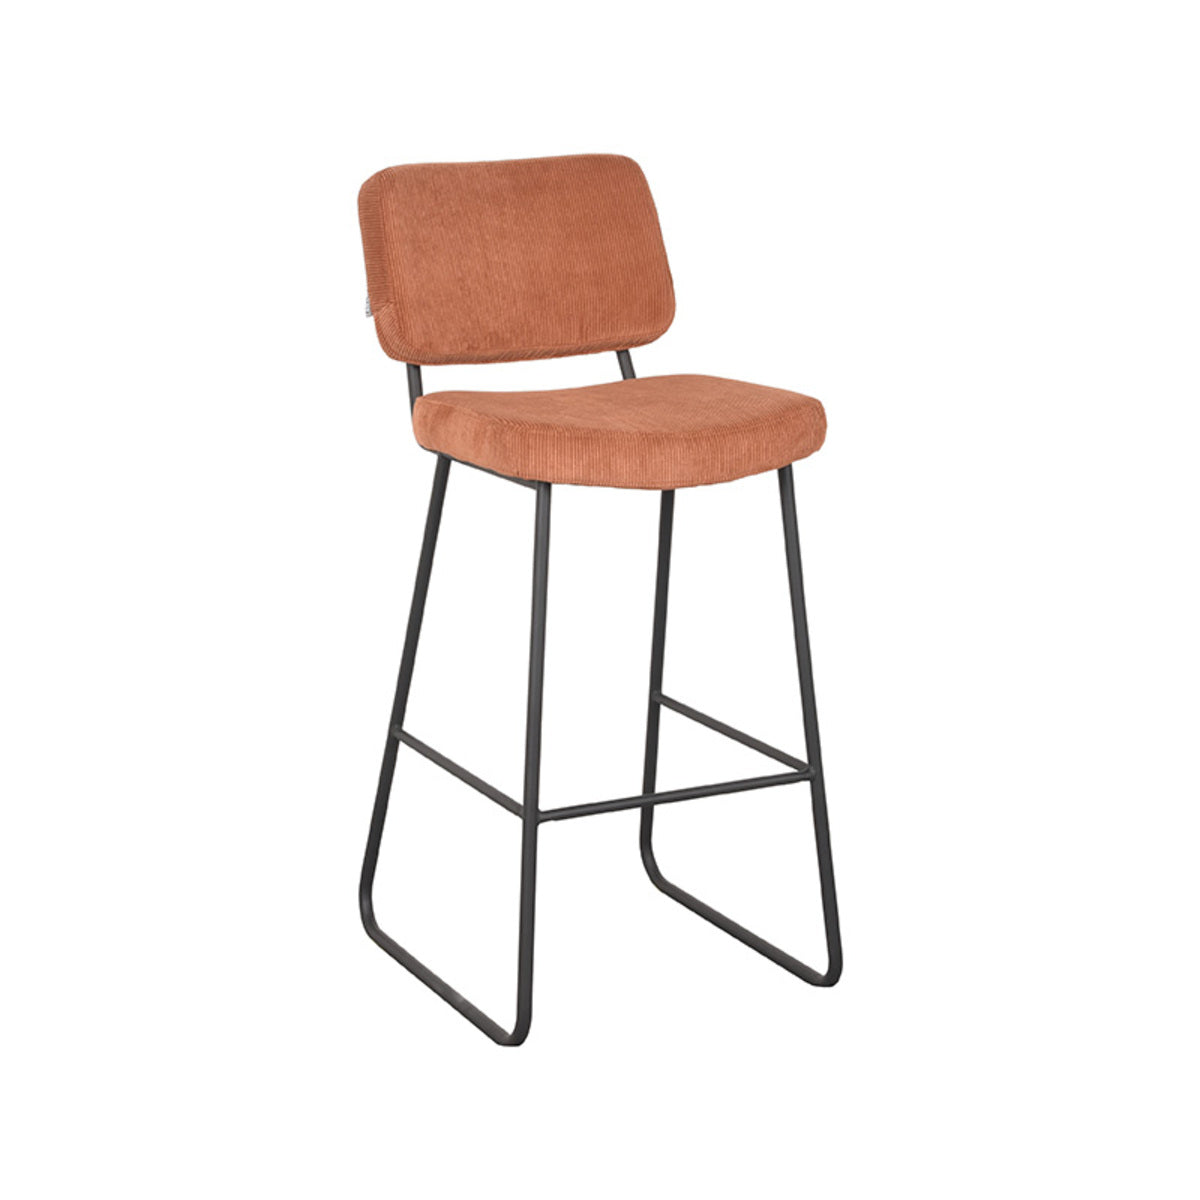 LABEL51 Bar stool Noah - Rest - Ribcord - Seat height 78 | 2 pieces